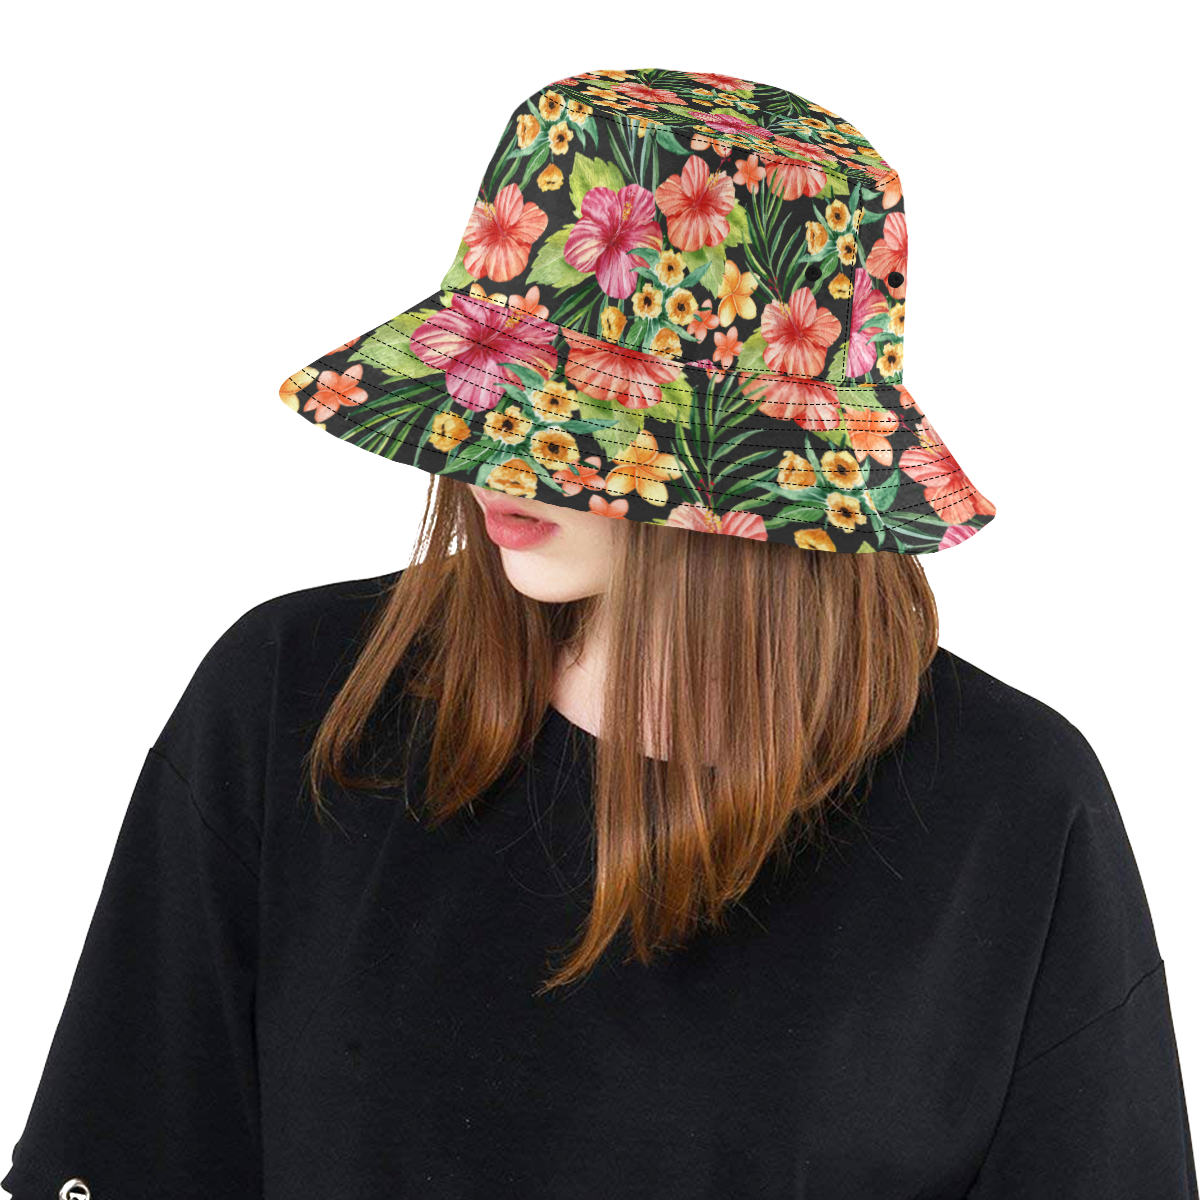 Awesome Tropical Hibiscus All Over Print Bucket Hat